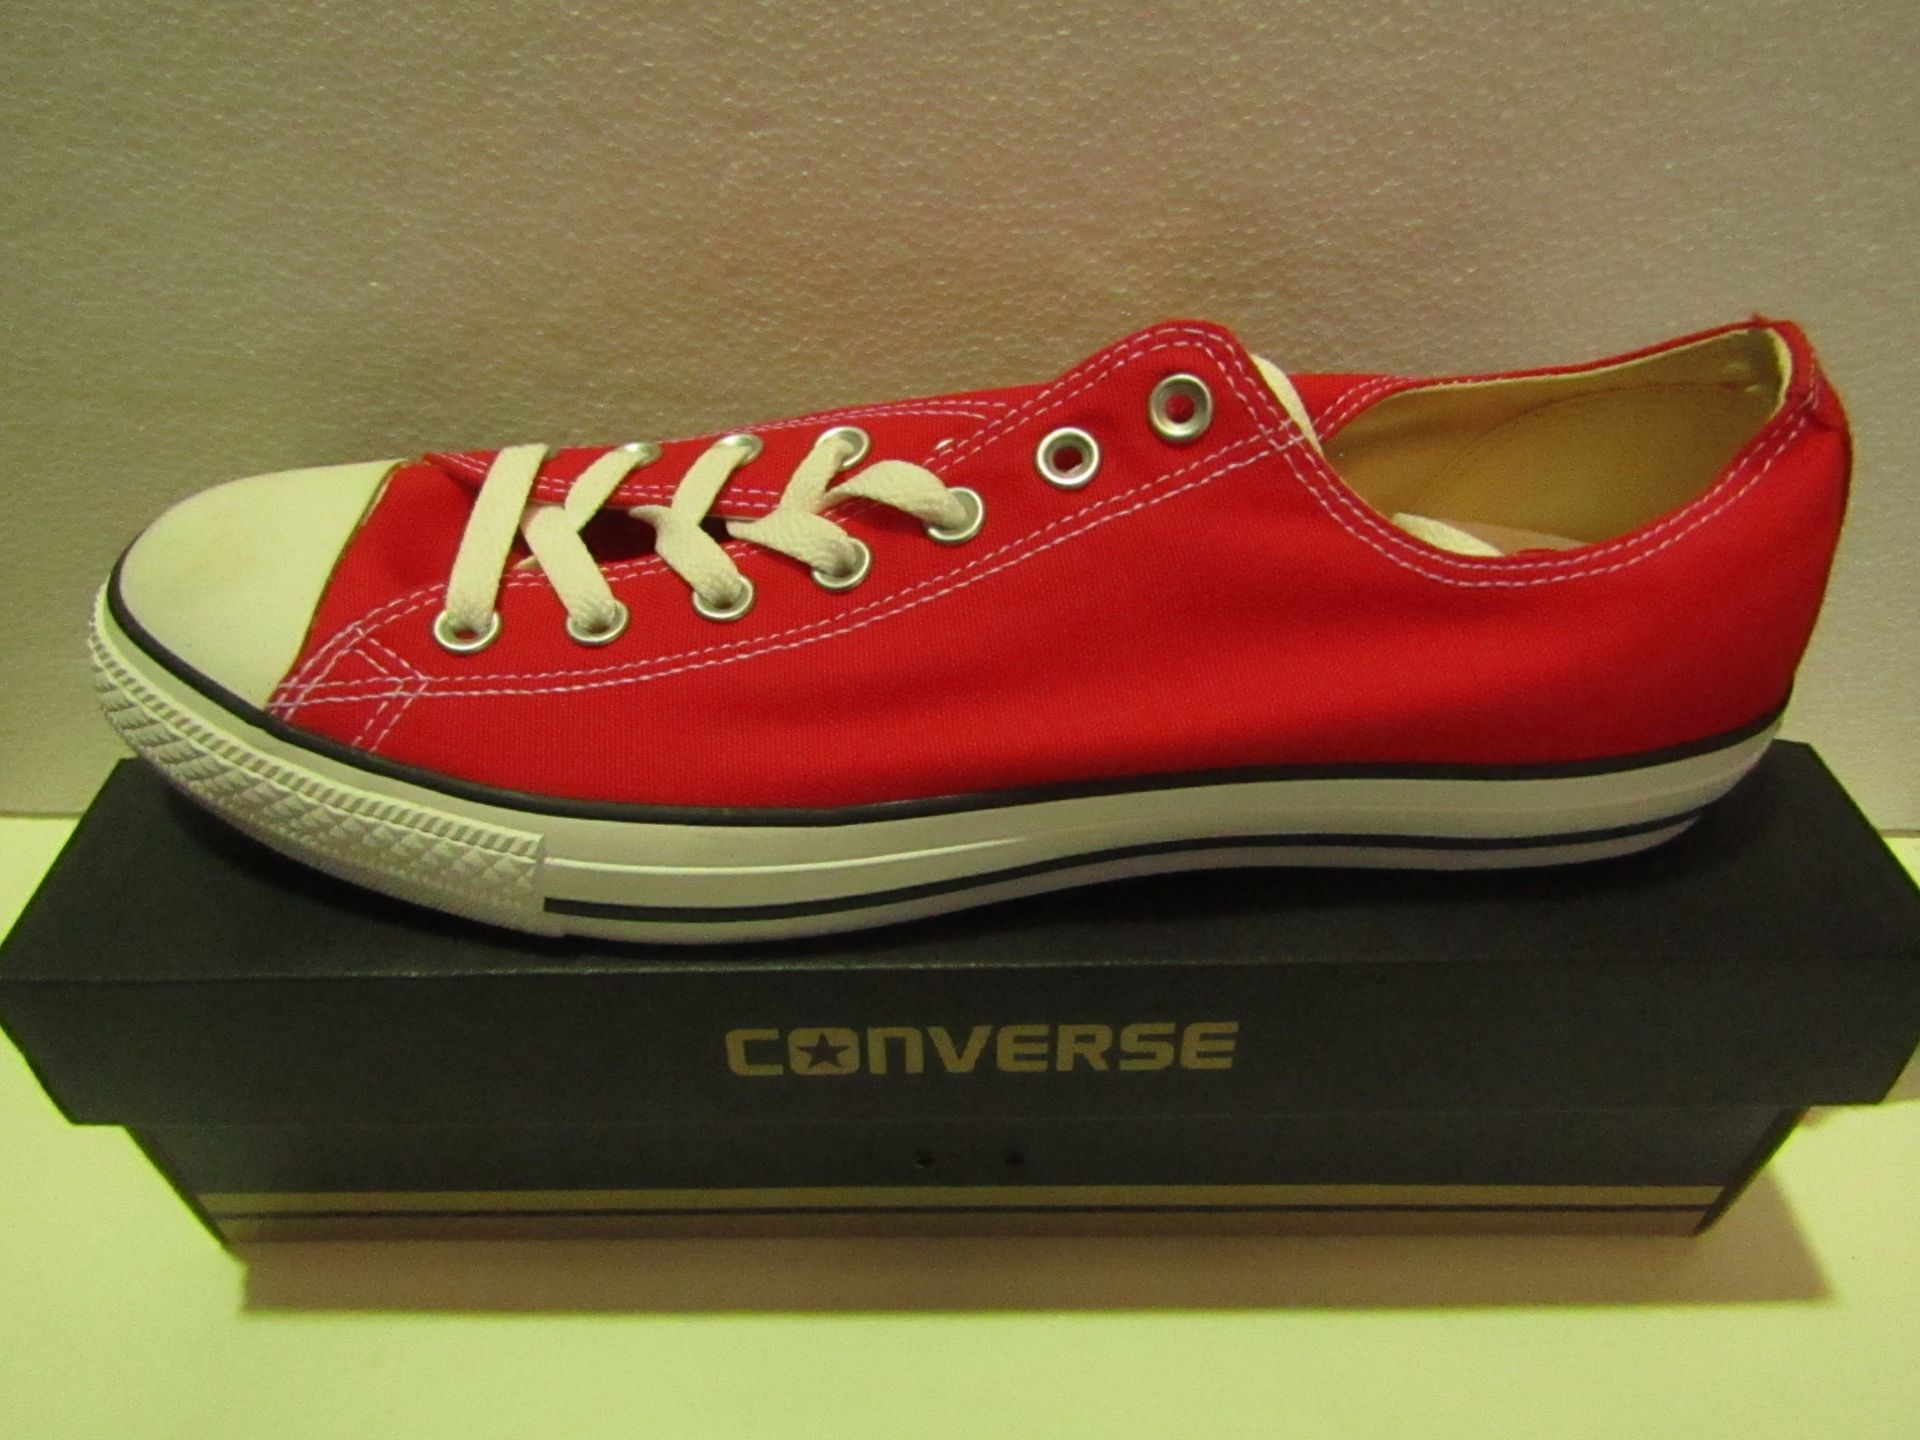 Converse All Star Red Canvas Trainer size UK 12 new & boxed see image for design